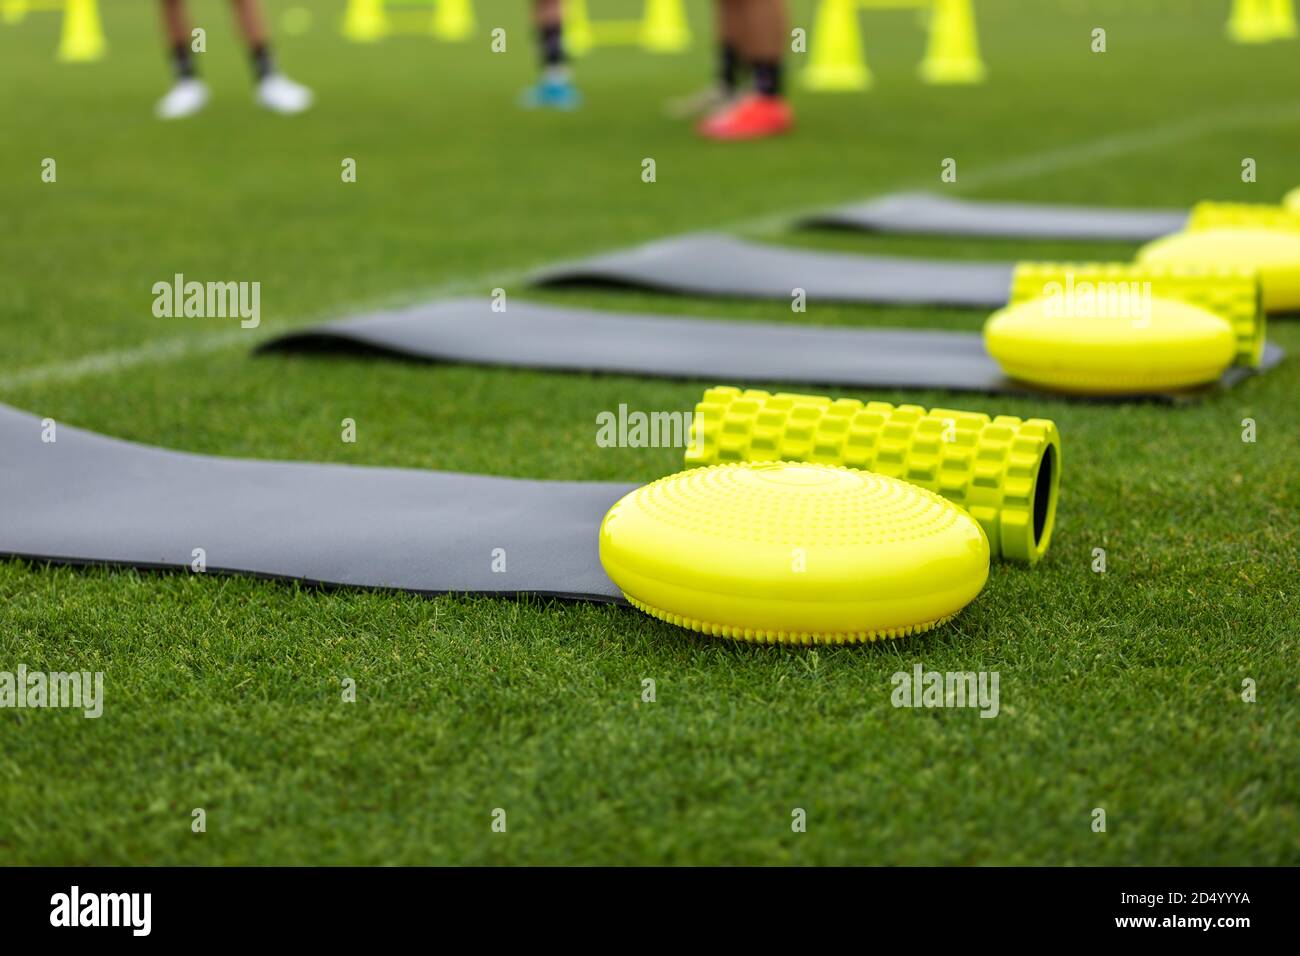 Training mat, goal roller and balance cushion. Sports training equipment on grass field. Young athletes and training cones in blurred background Stock Photo